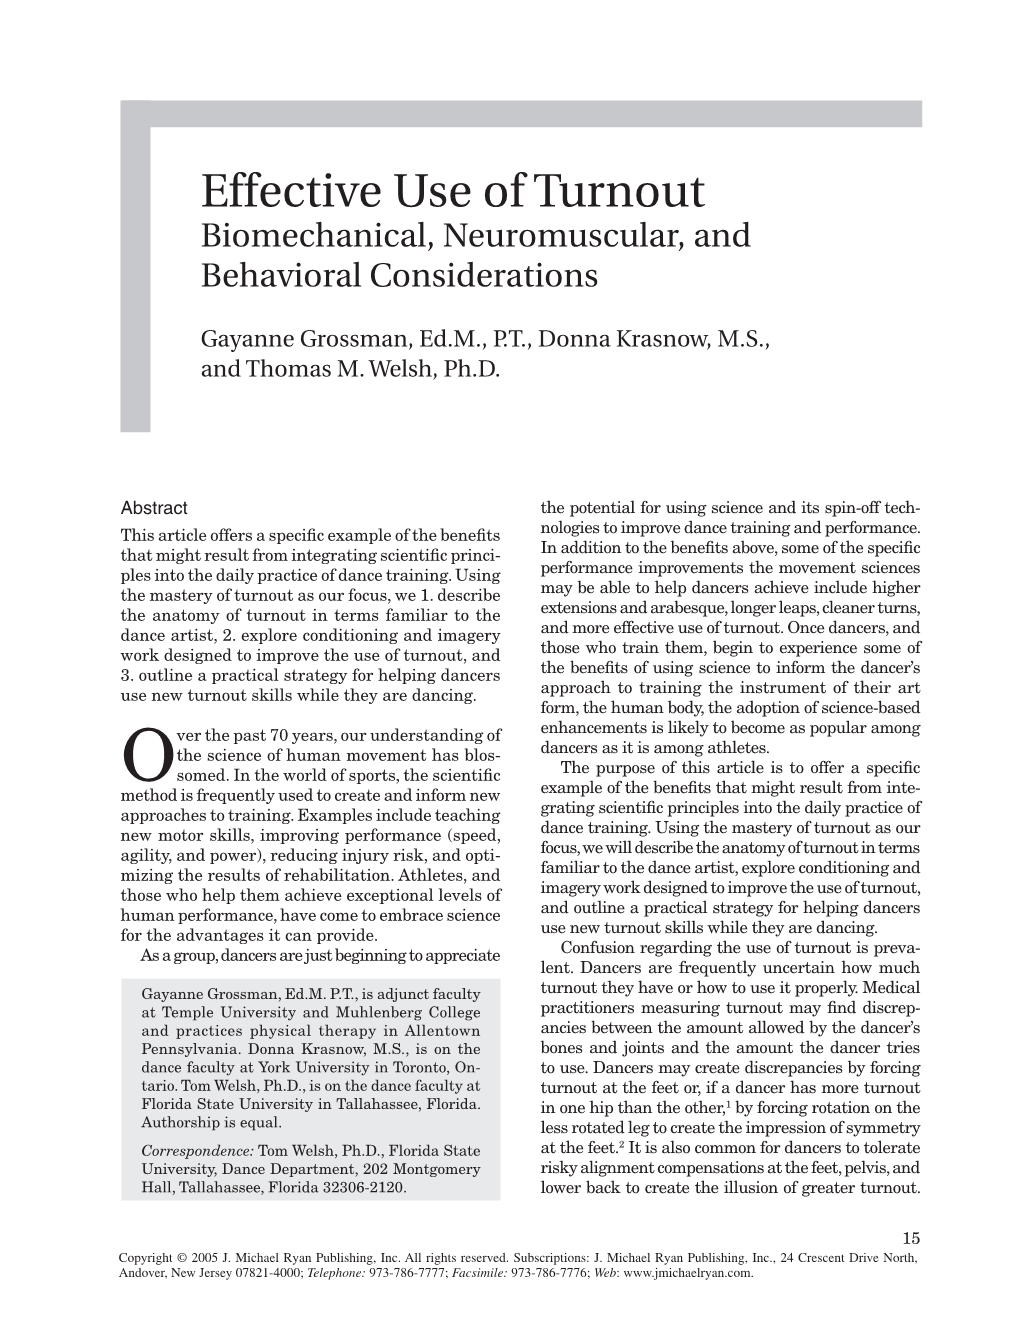 Effective Use of Turnout Biomechanical, Neuromuscular, and Behavioral Considerations